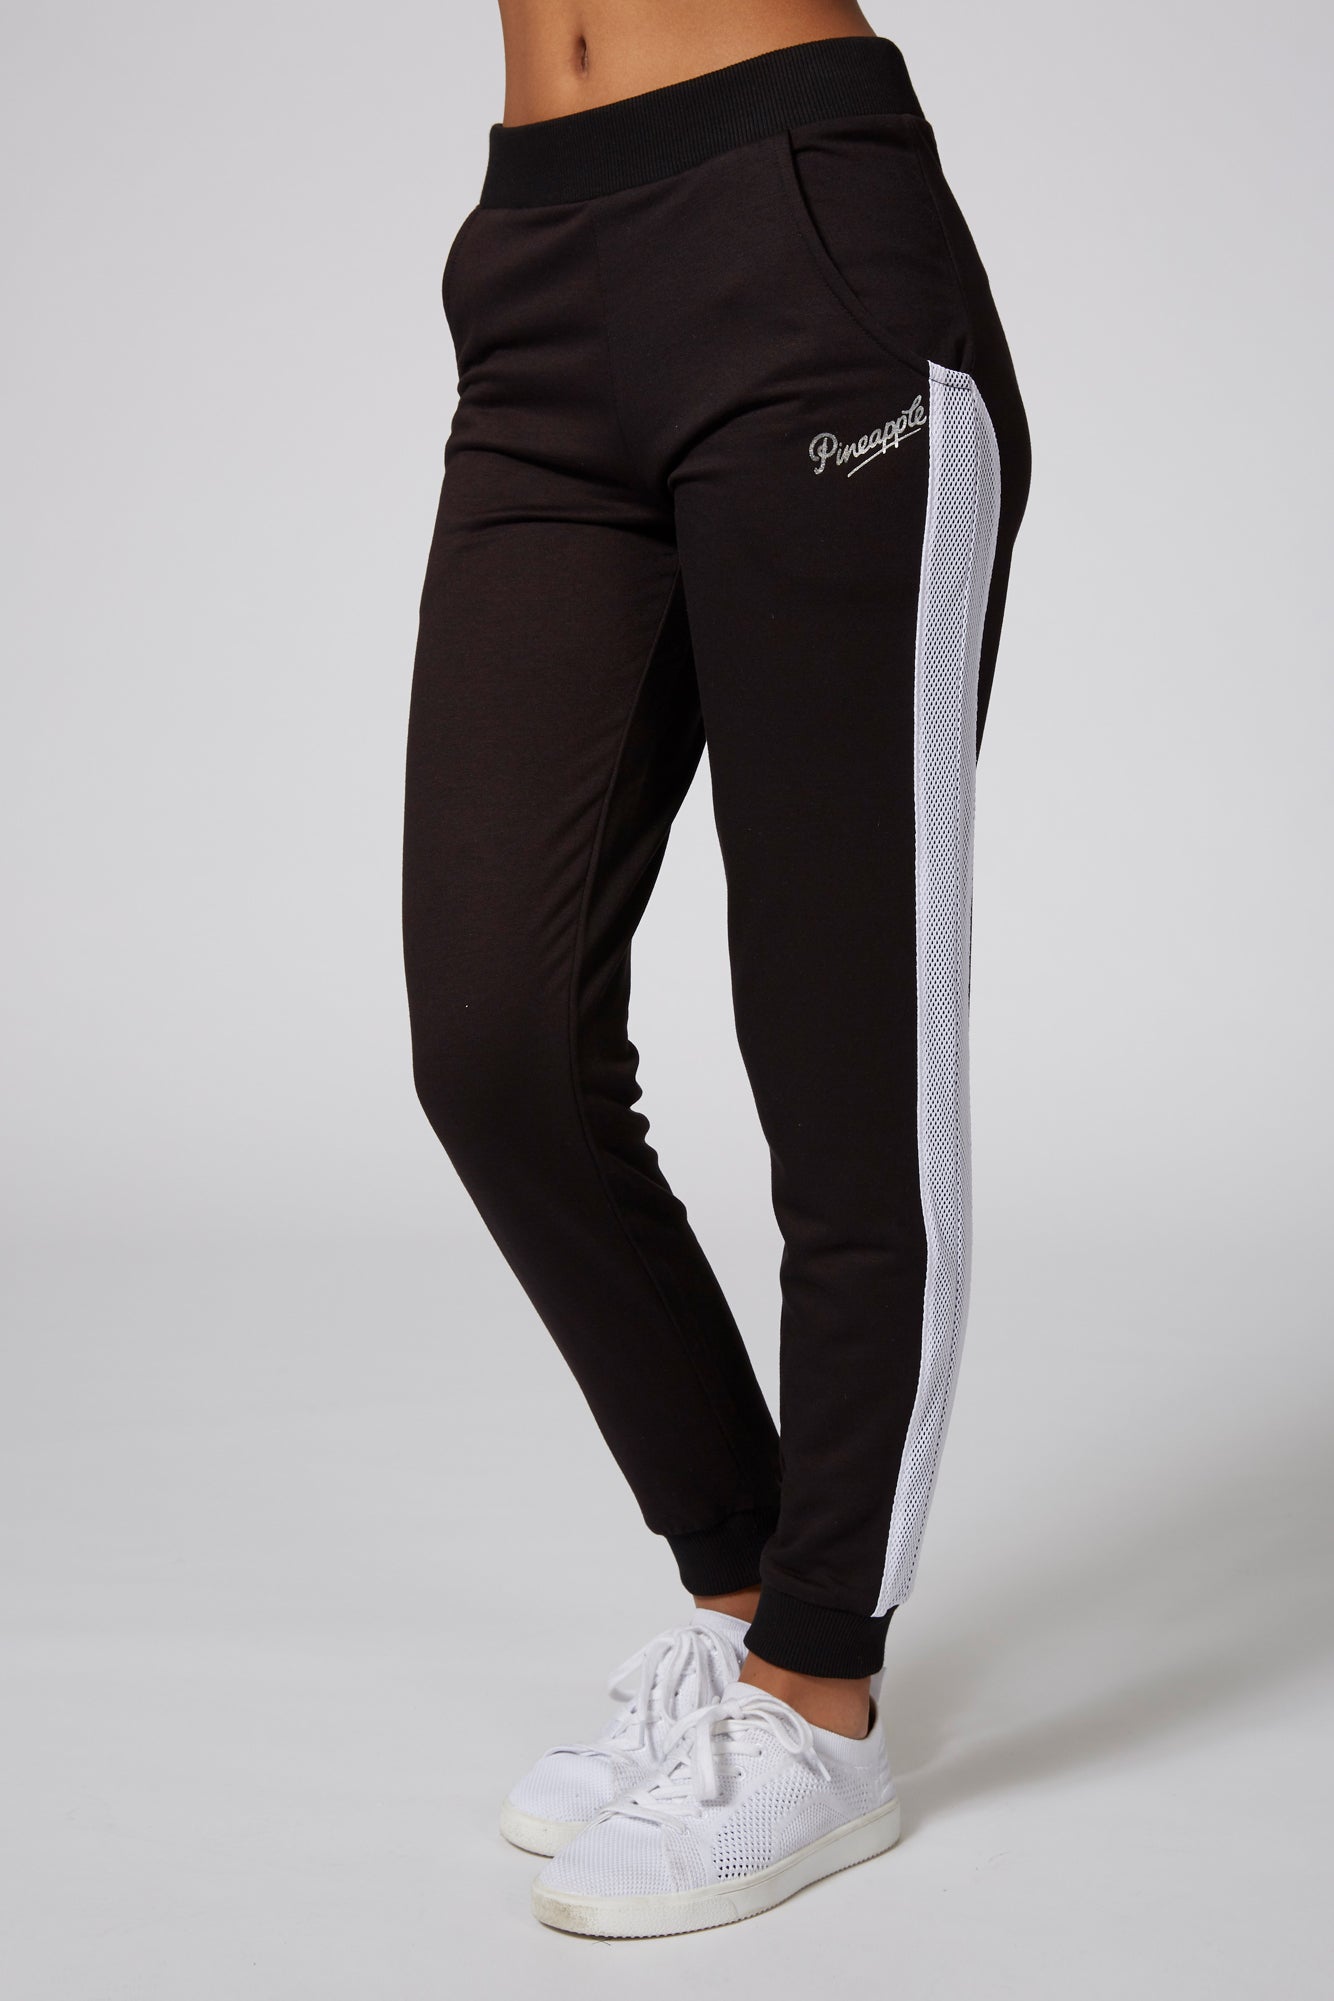 Trackpants: Shop Online Girls Navy Blue, Sky Blue Cotton Trackpants on  Cliths.com